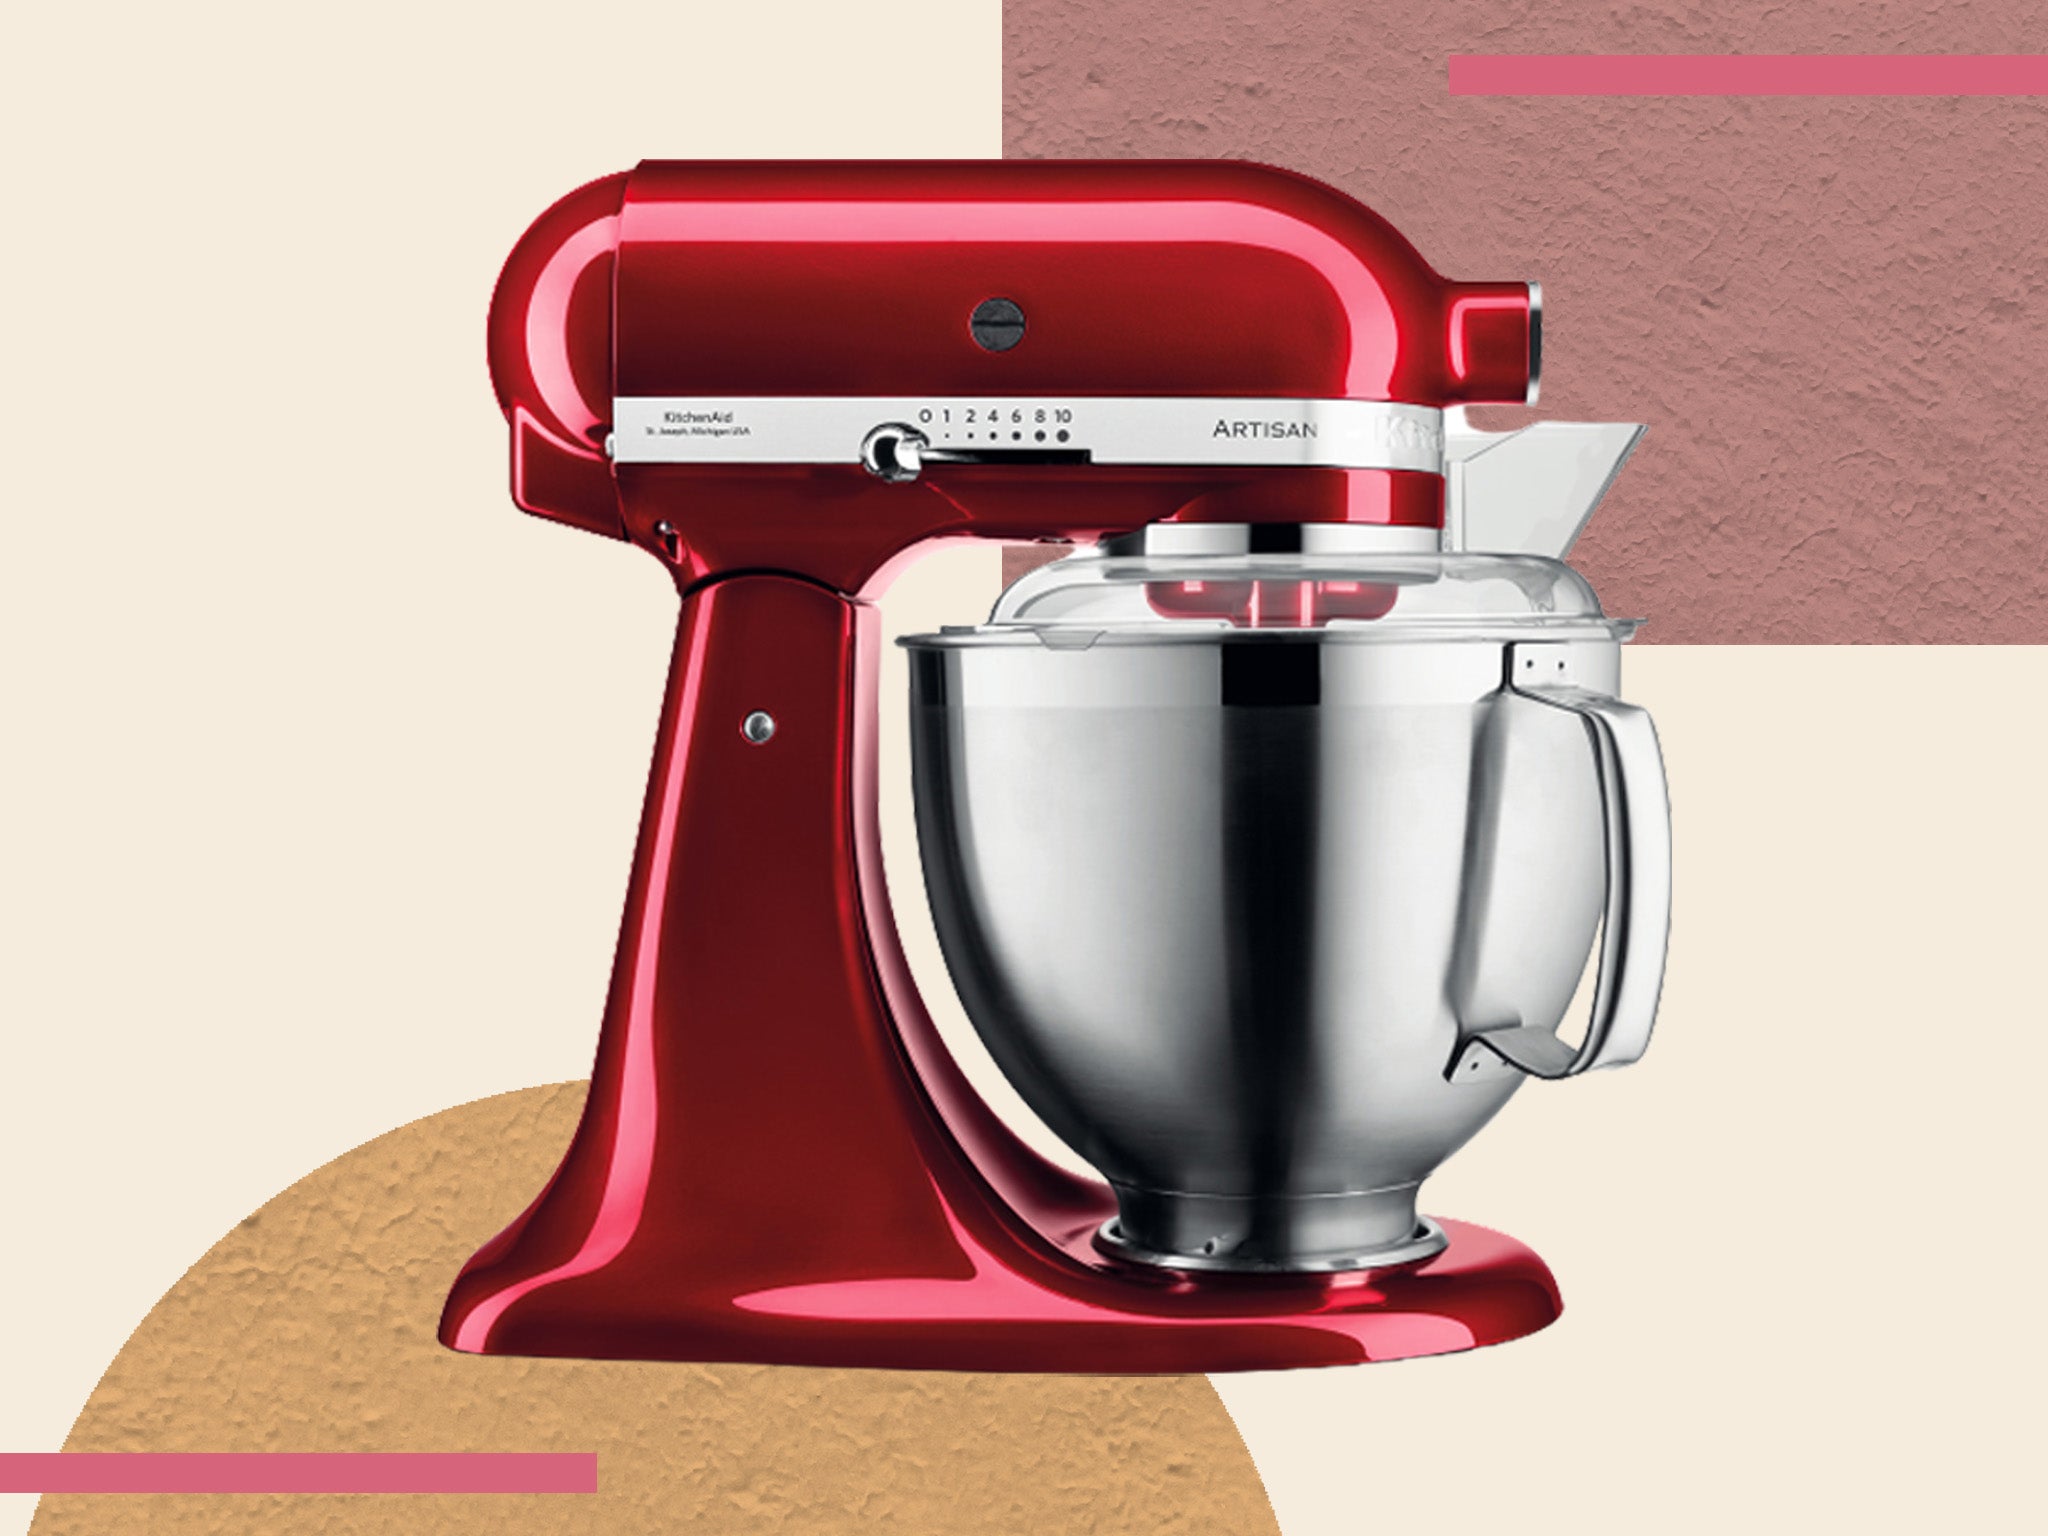 skam Kærlig grill KitchenAid Cyber Monday deal 2021: Get 25% off the artisan stand mixer at  Amazon | The Independent